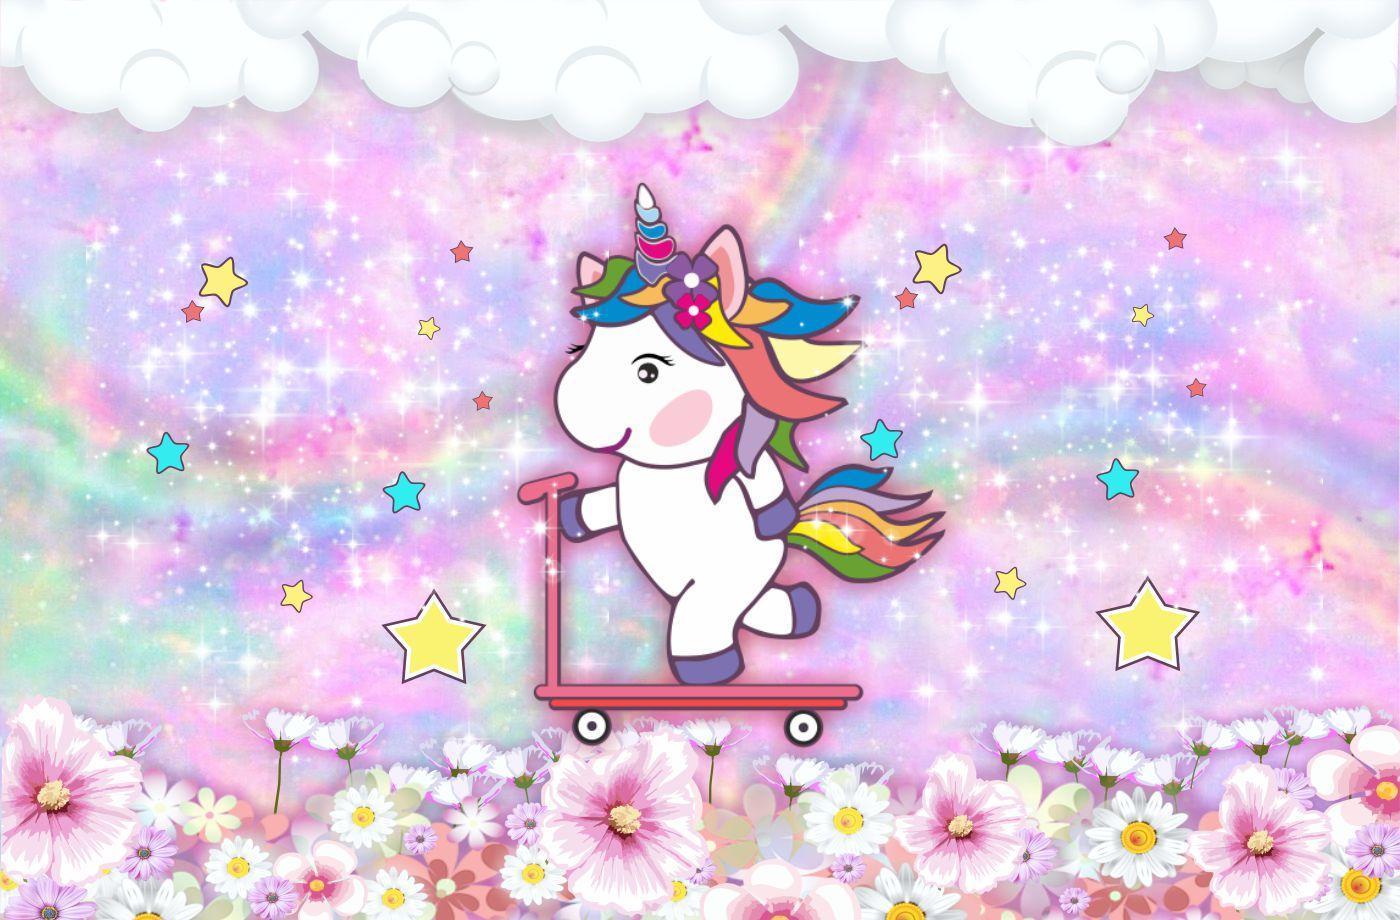 Cute Unicorn Shelly Vacation Live wallpaper for Android